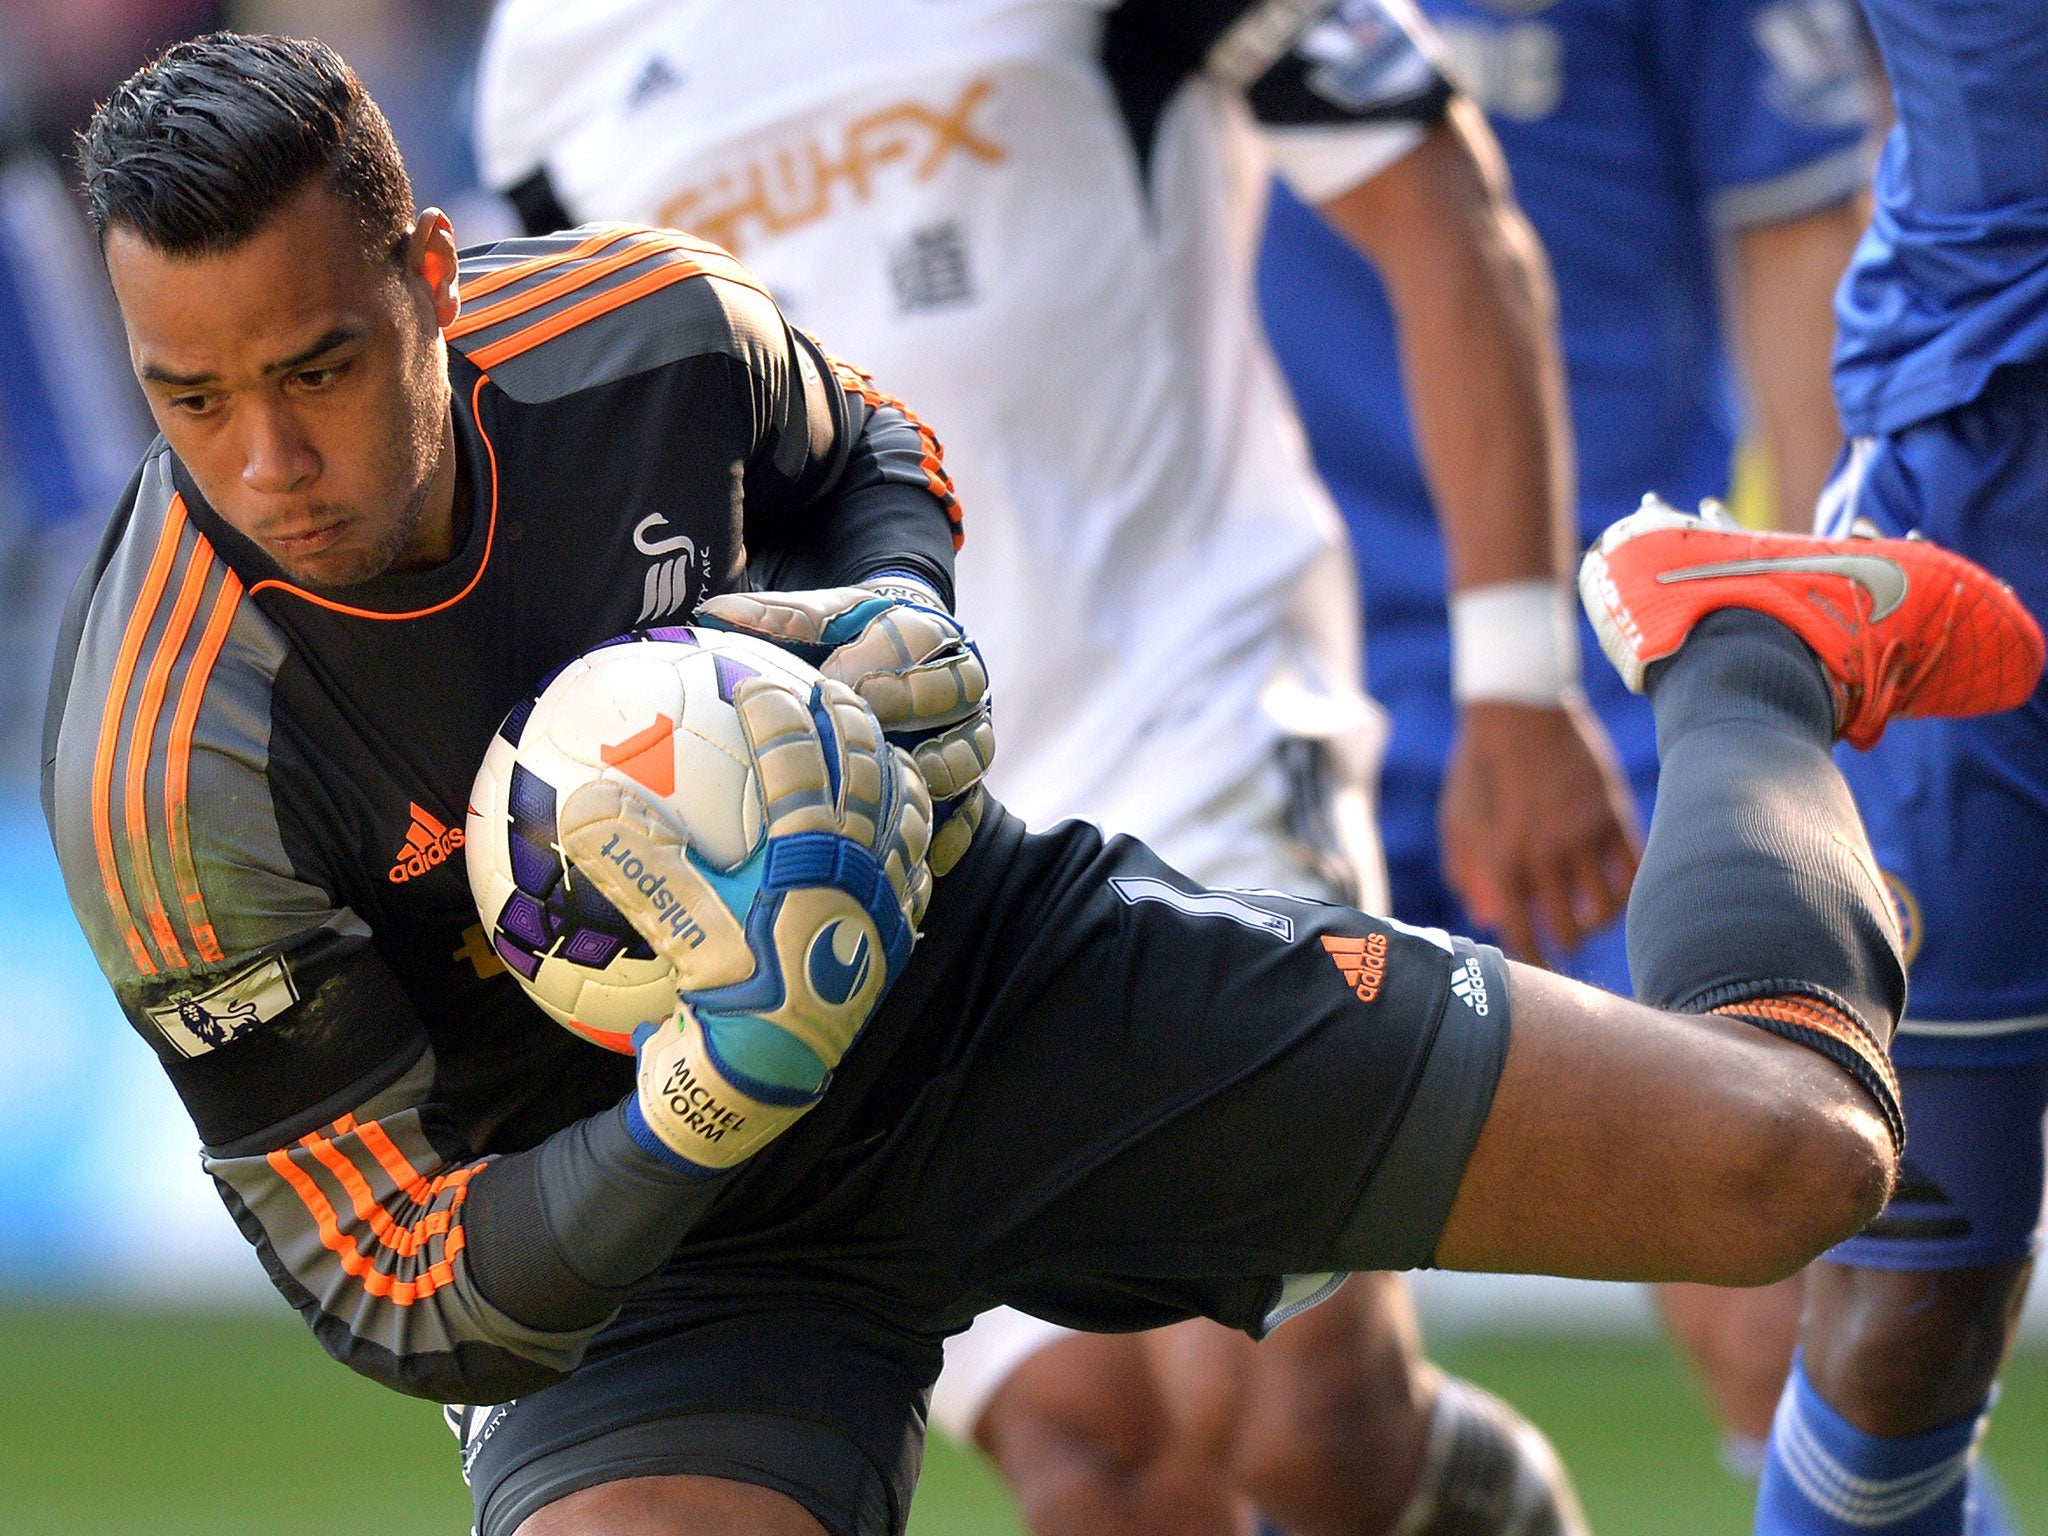 Tottenham have agreed a fee for Swansea goalkeeper Michel Vorm, according to reports